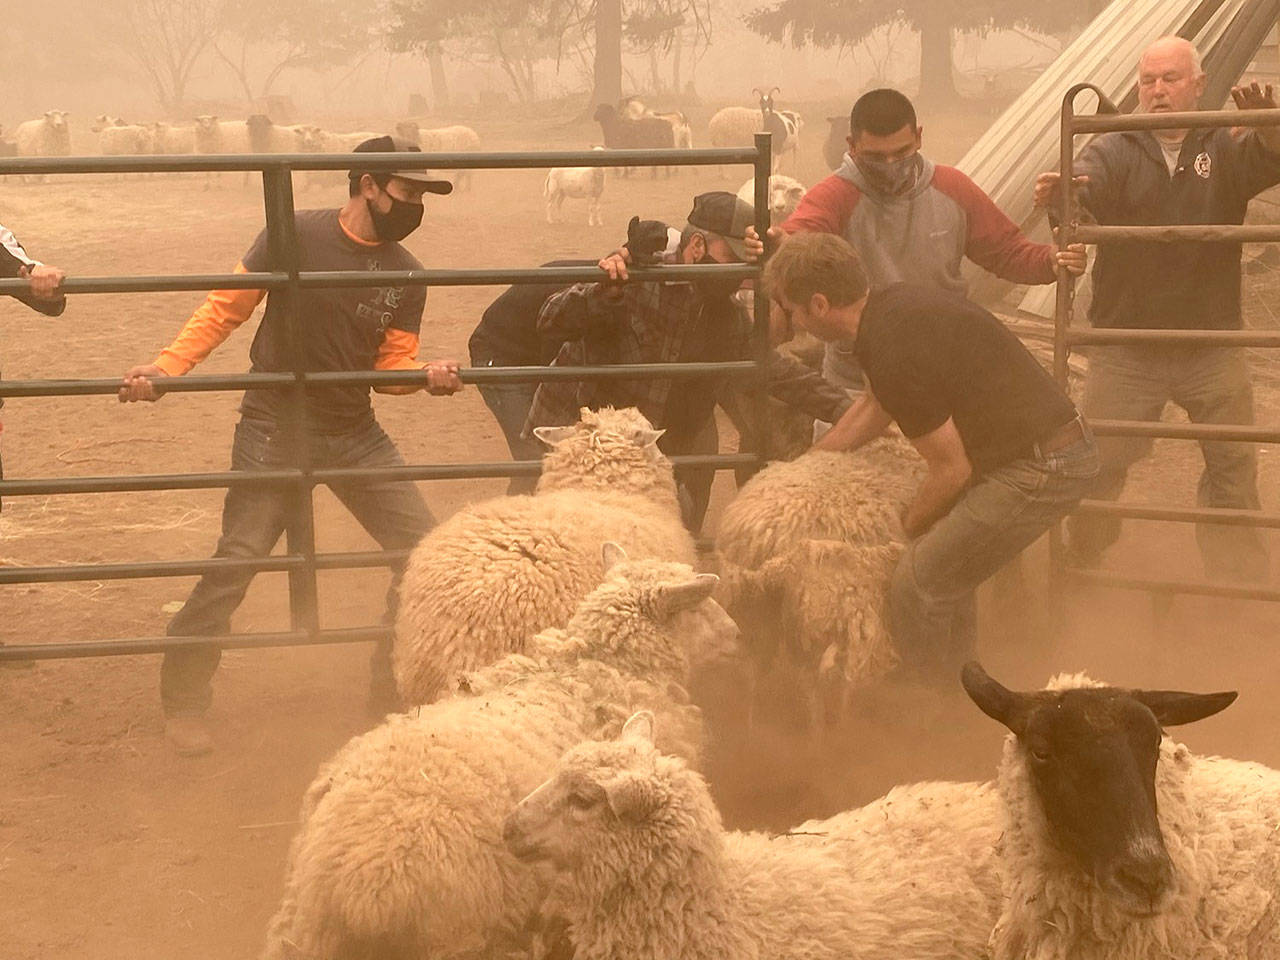 As death toll mounts, volunteers brave Oregon wildfires to rescue stranded livestock